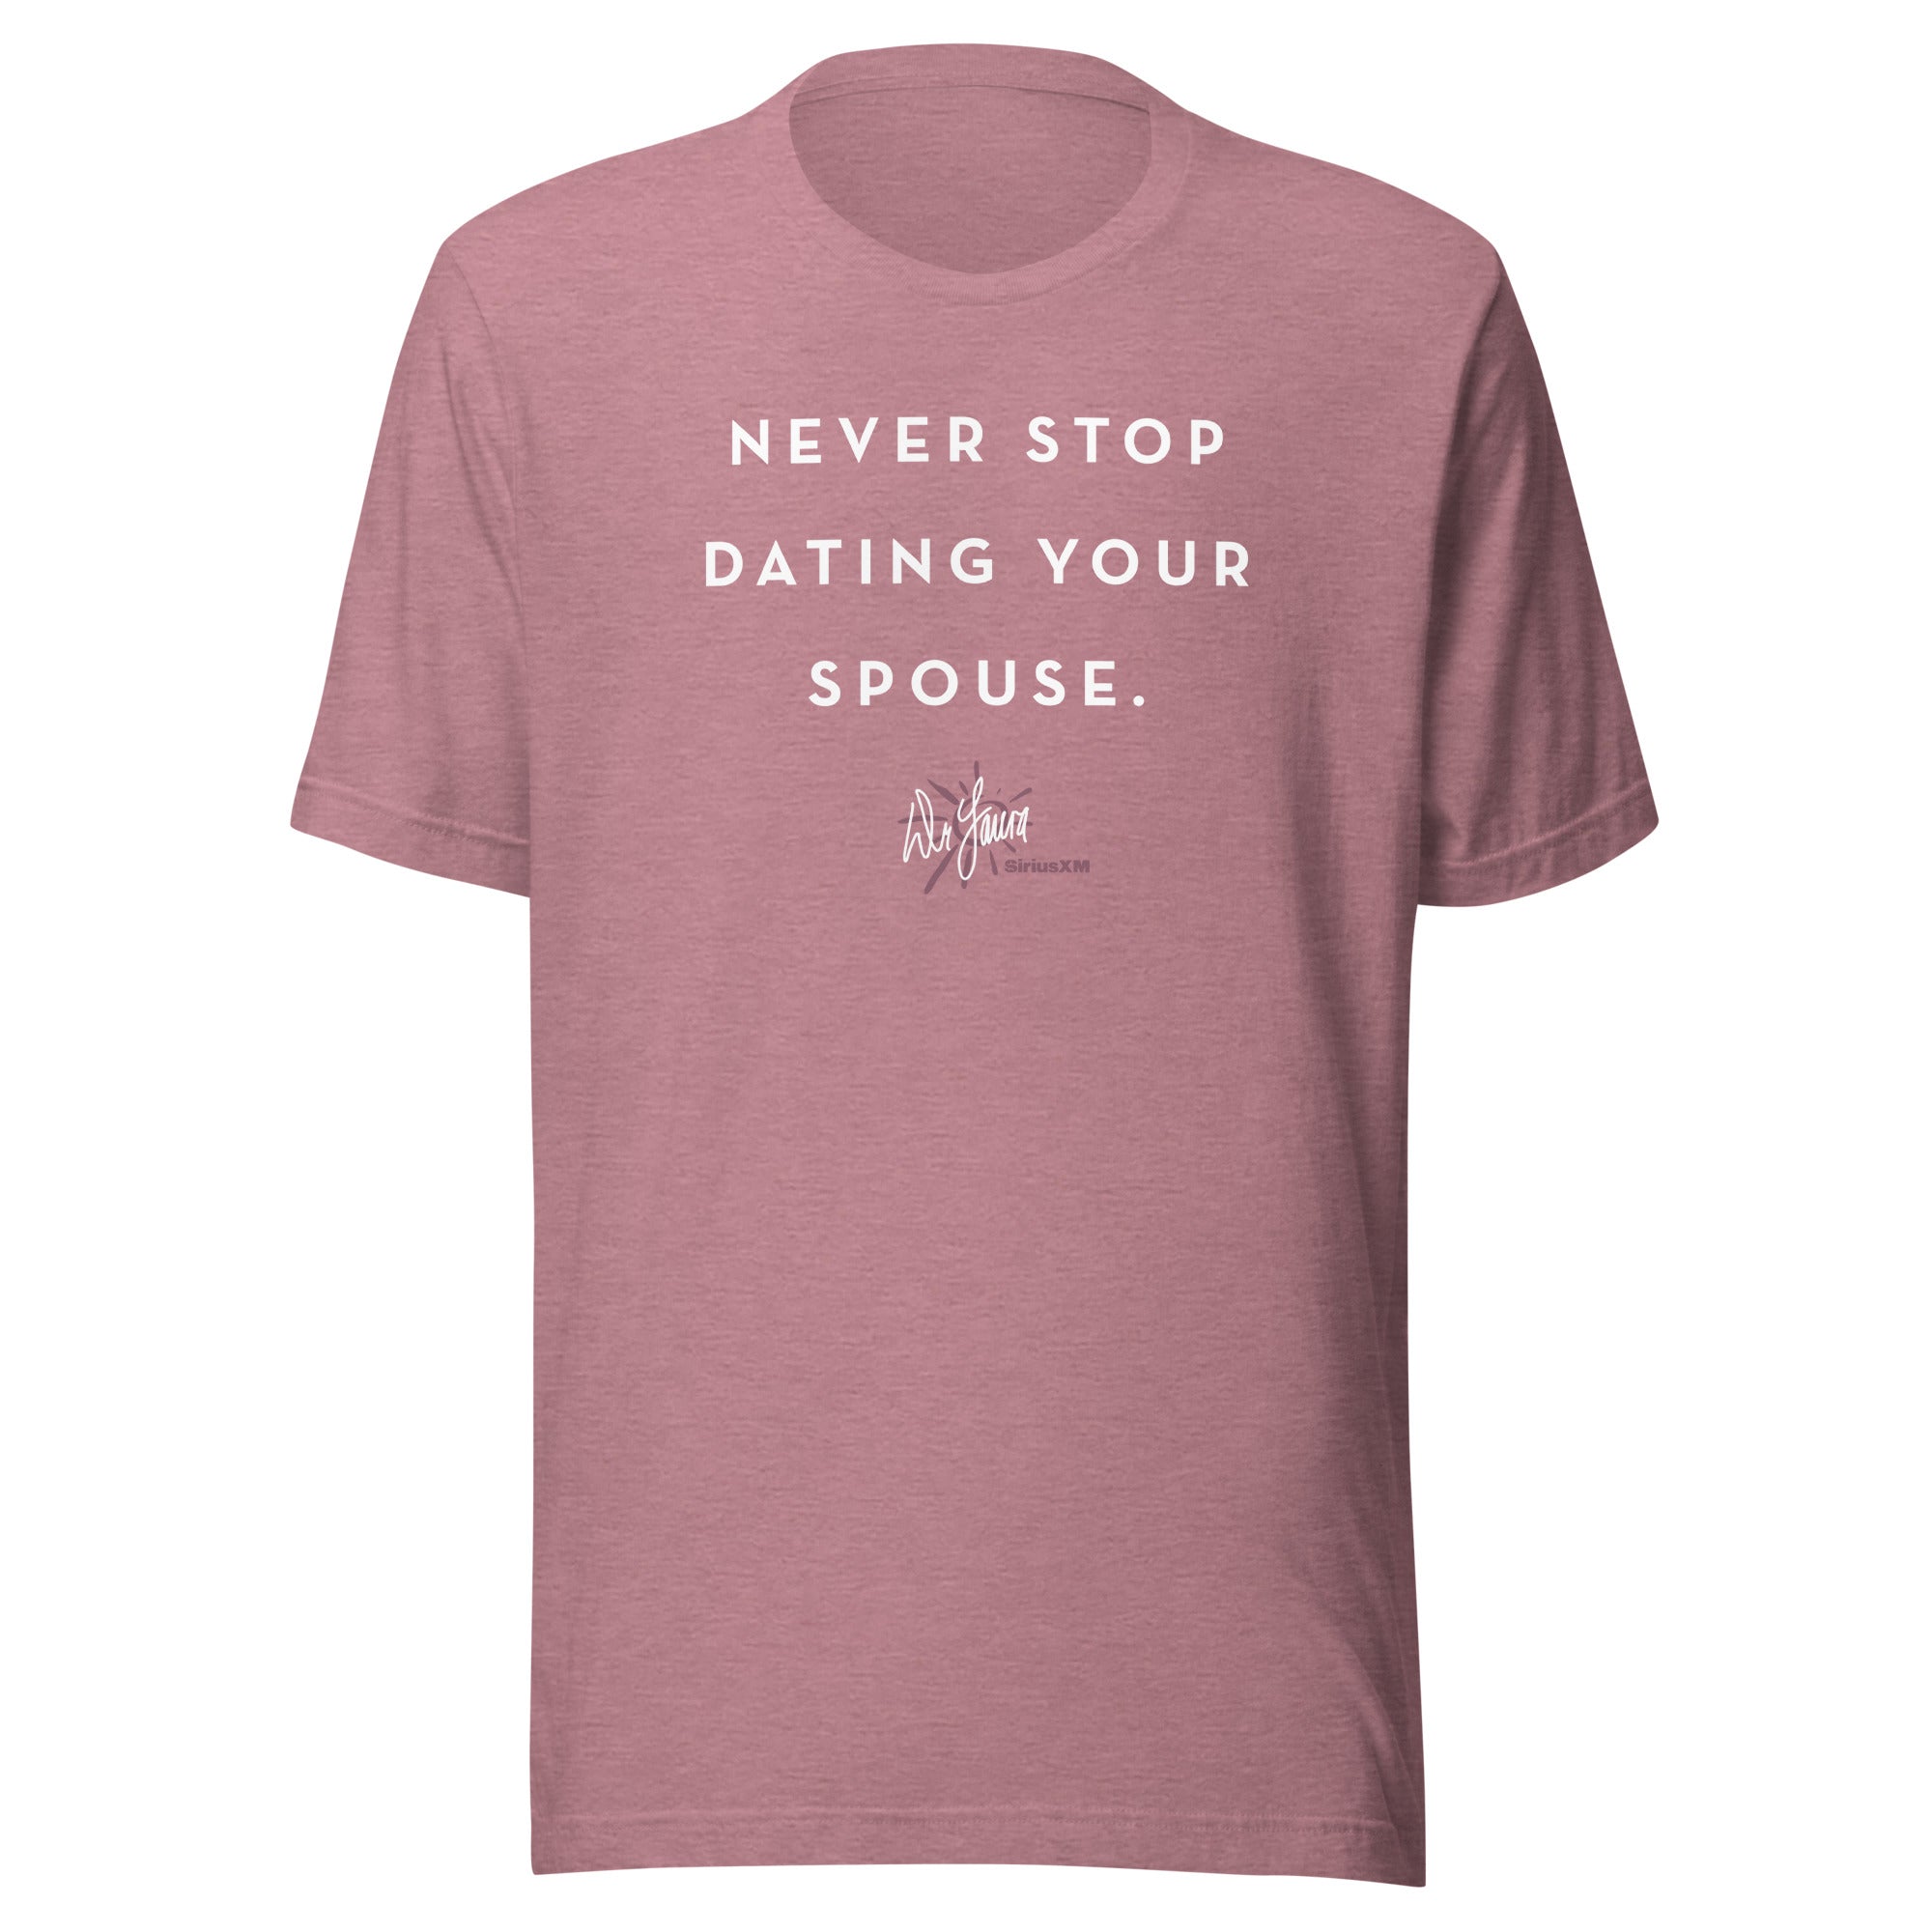 Dr. Laura: Dating Your Spouse T-shirt